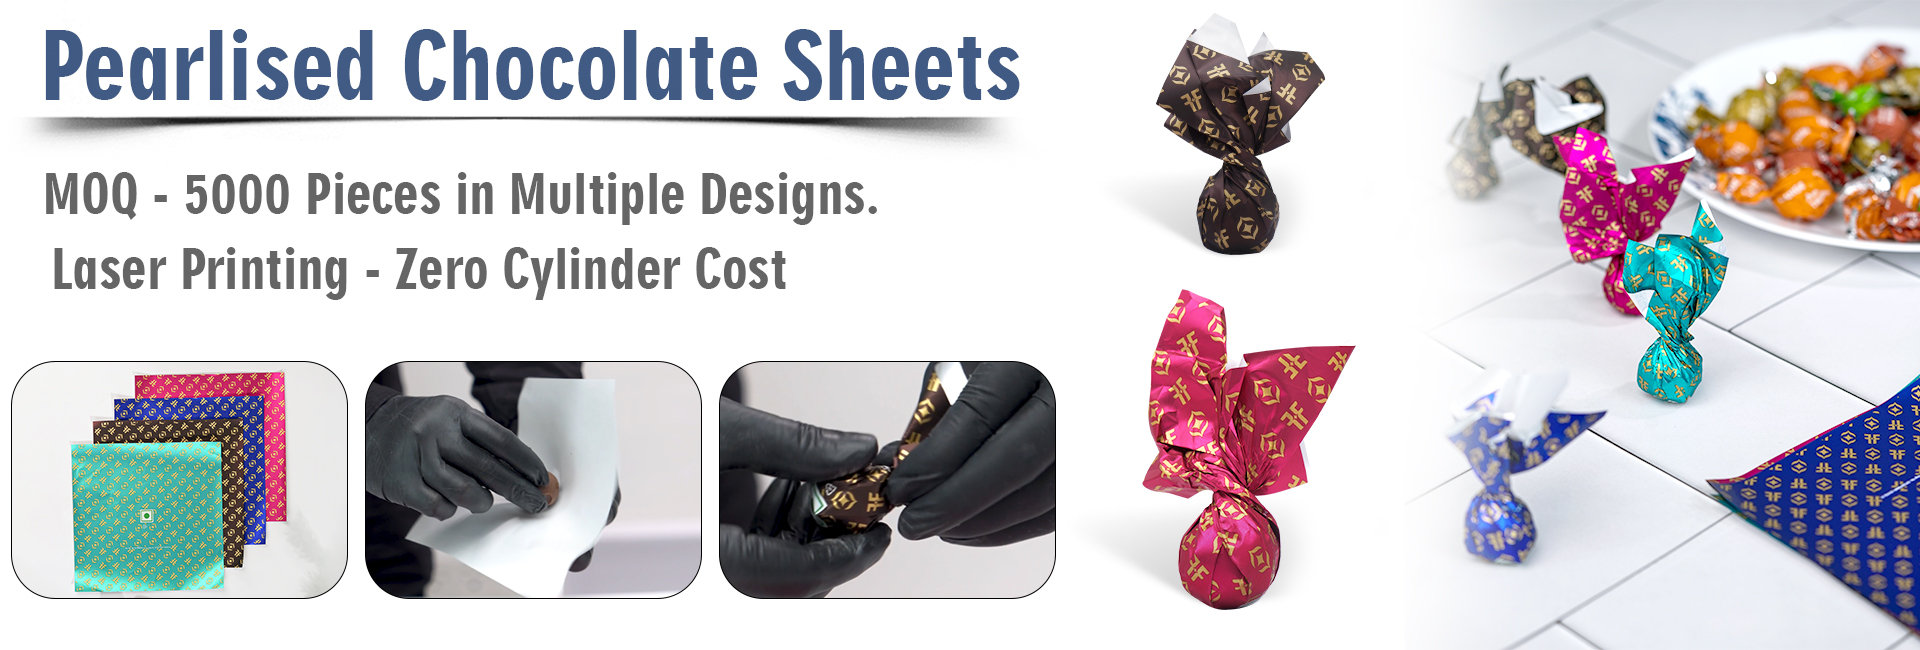 Pearlised Chocolate Sheets